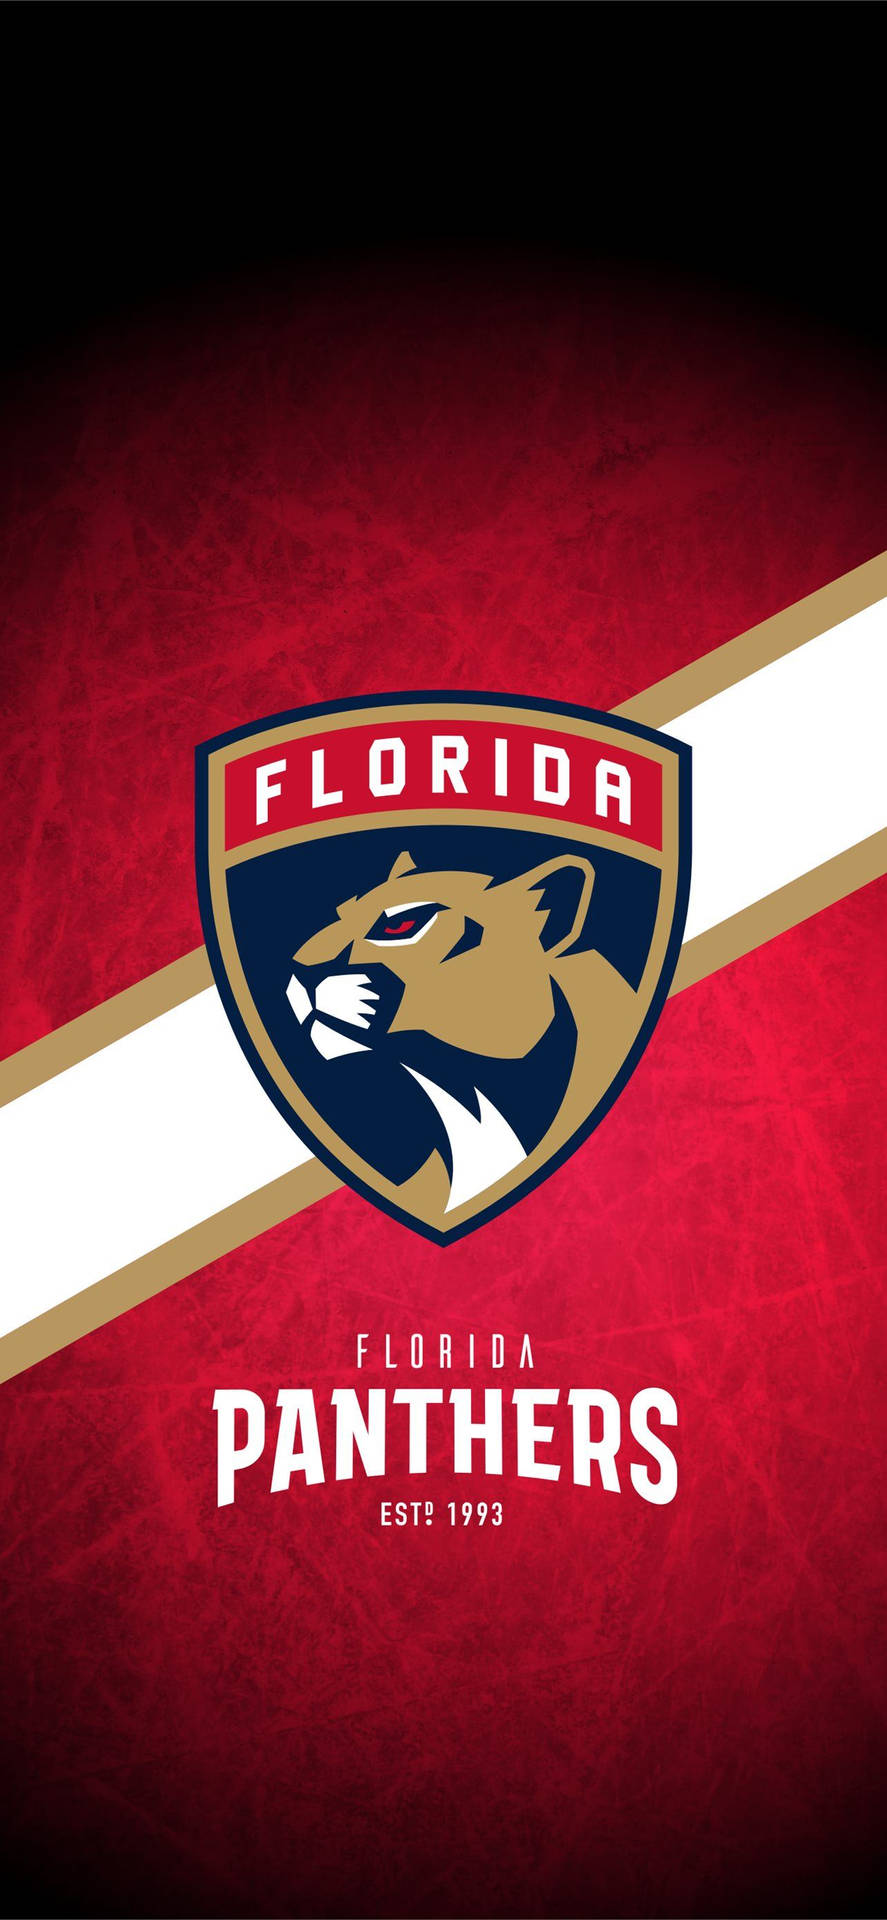 Florida Panthers Hockey Team In Action Background